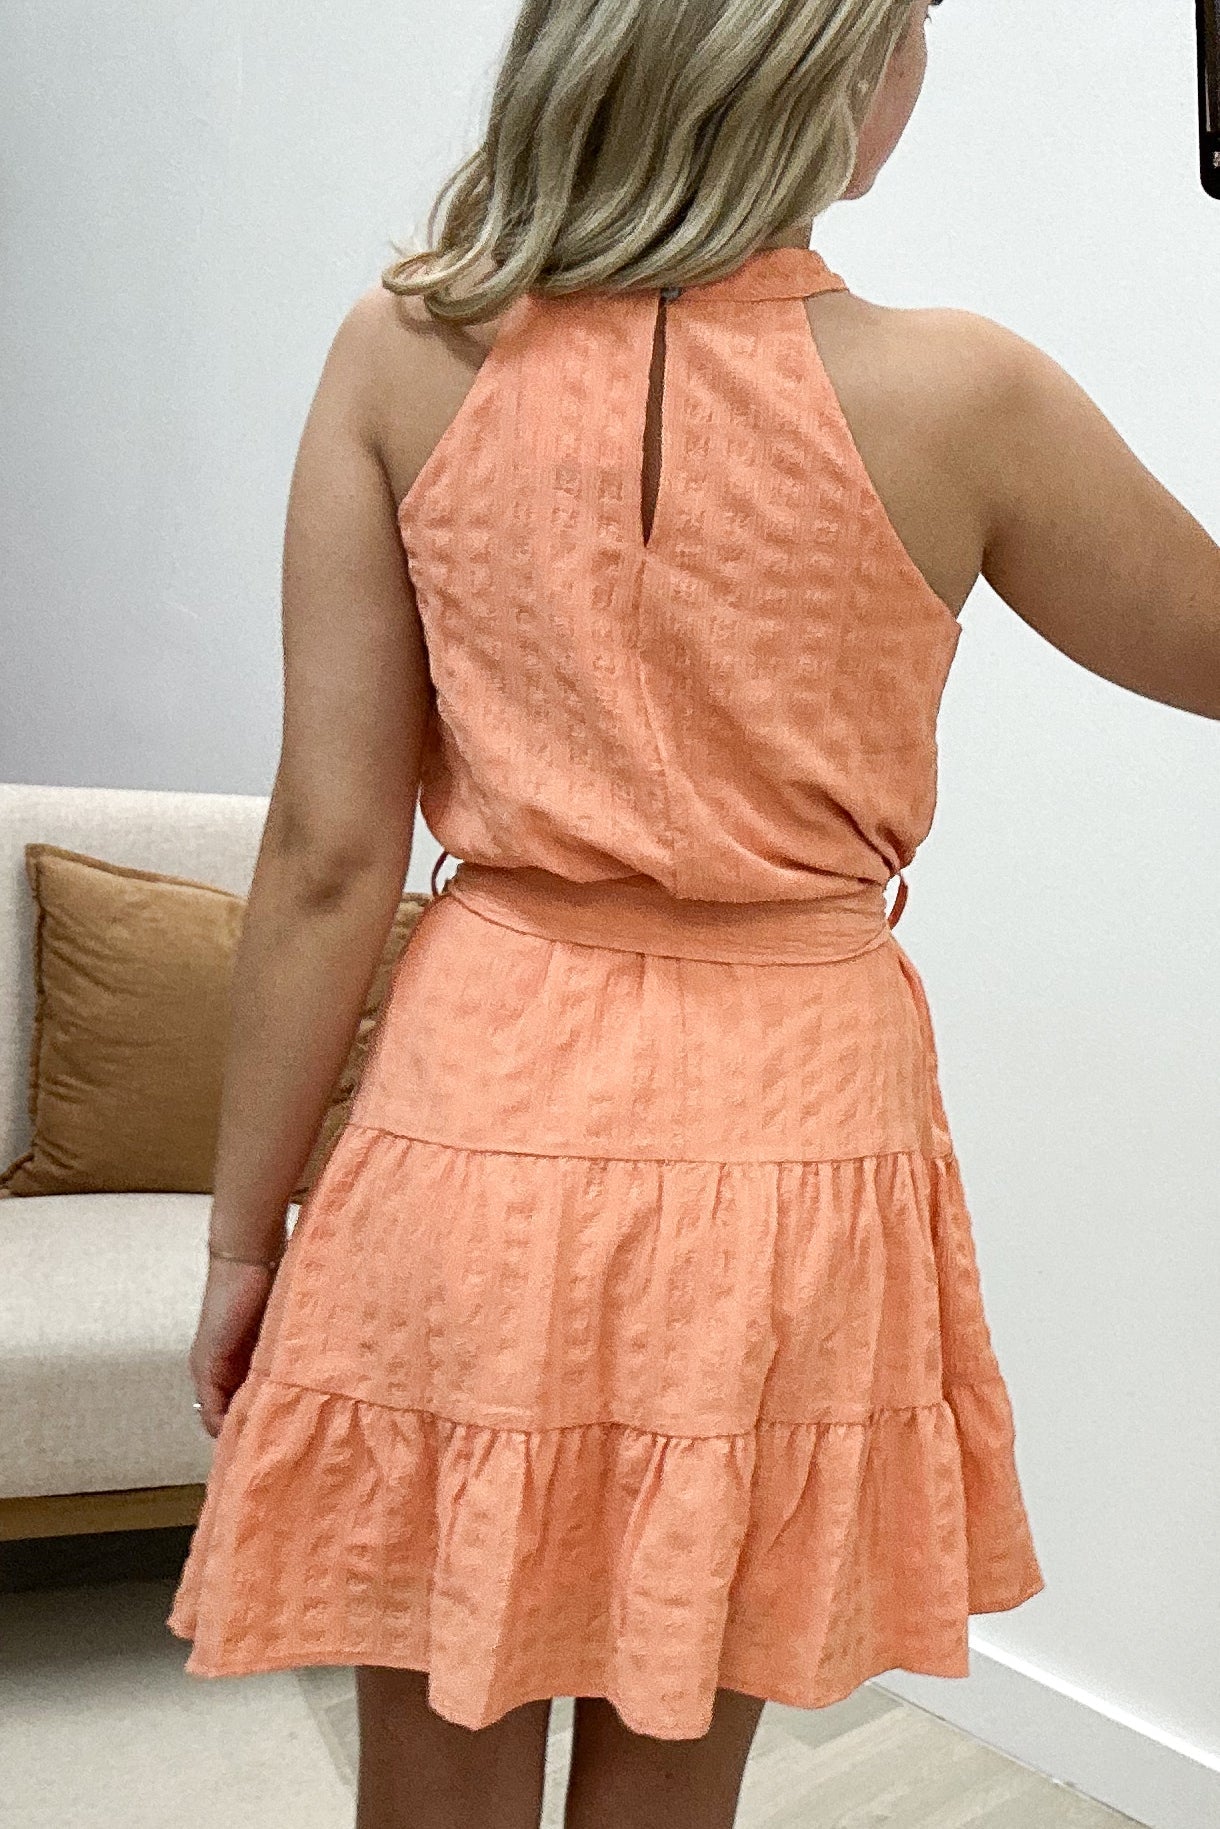 "Dreamsicle Delight" Dress (Apricot) - Happily Ever Aften